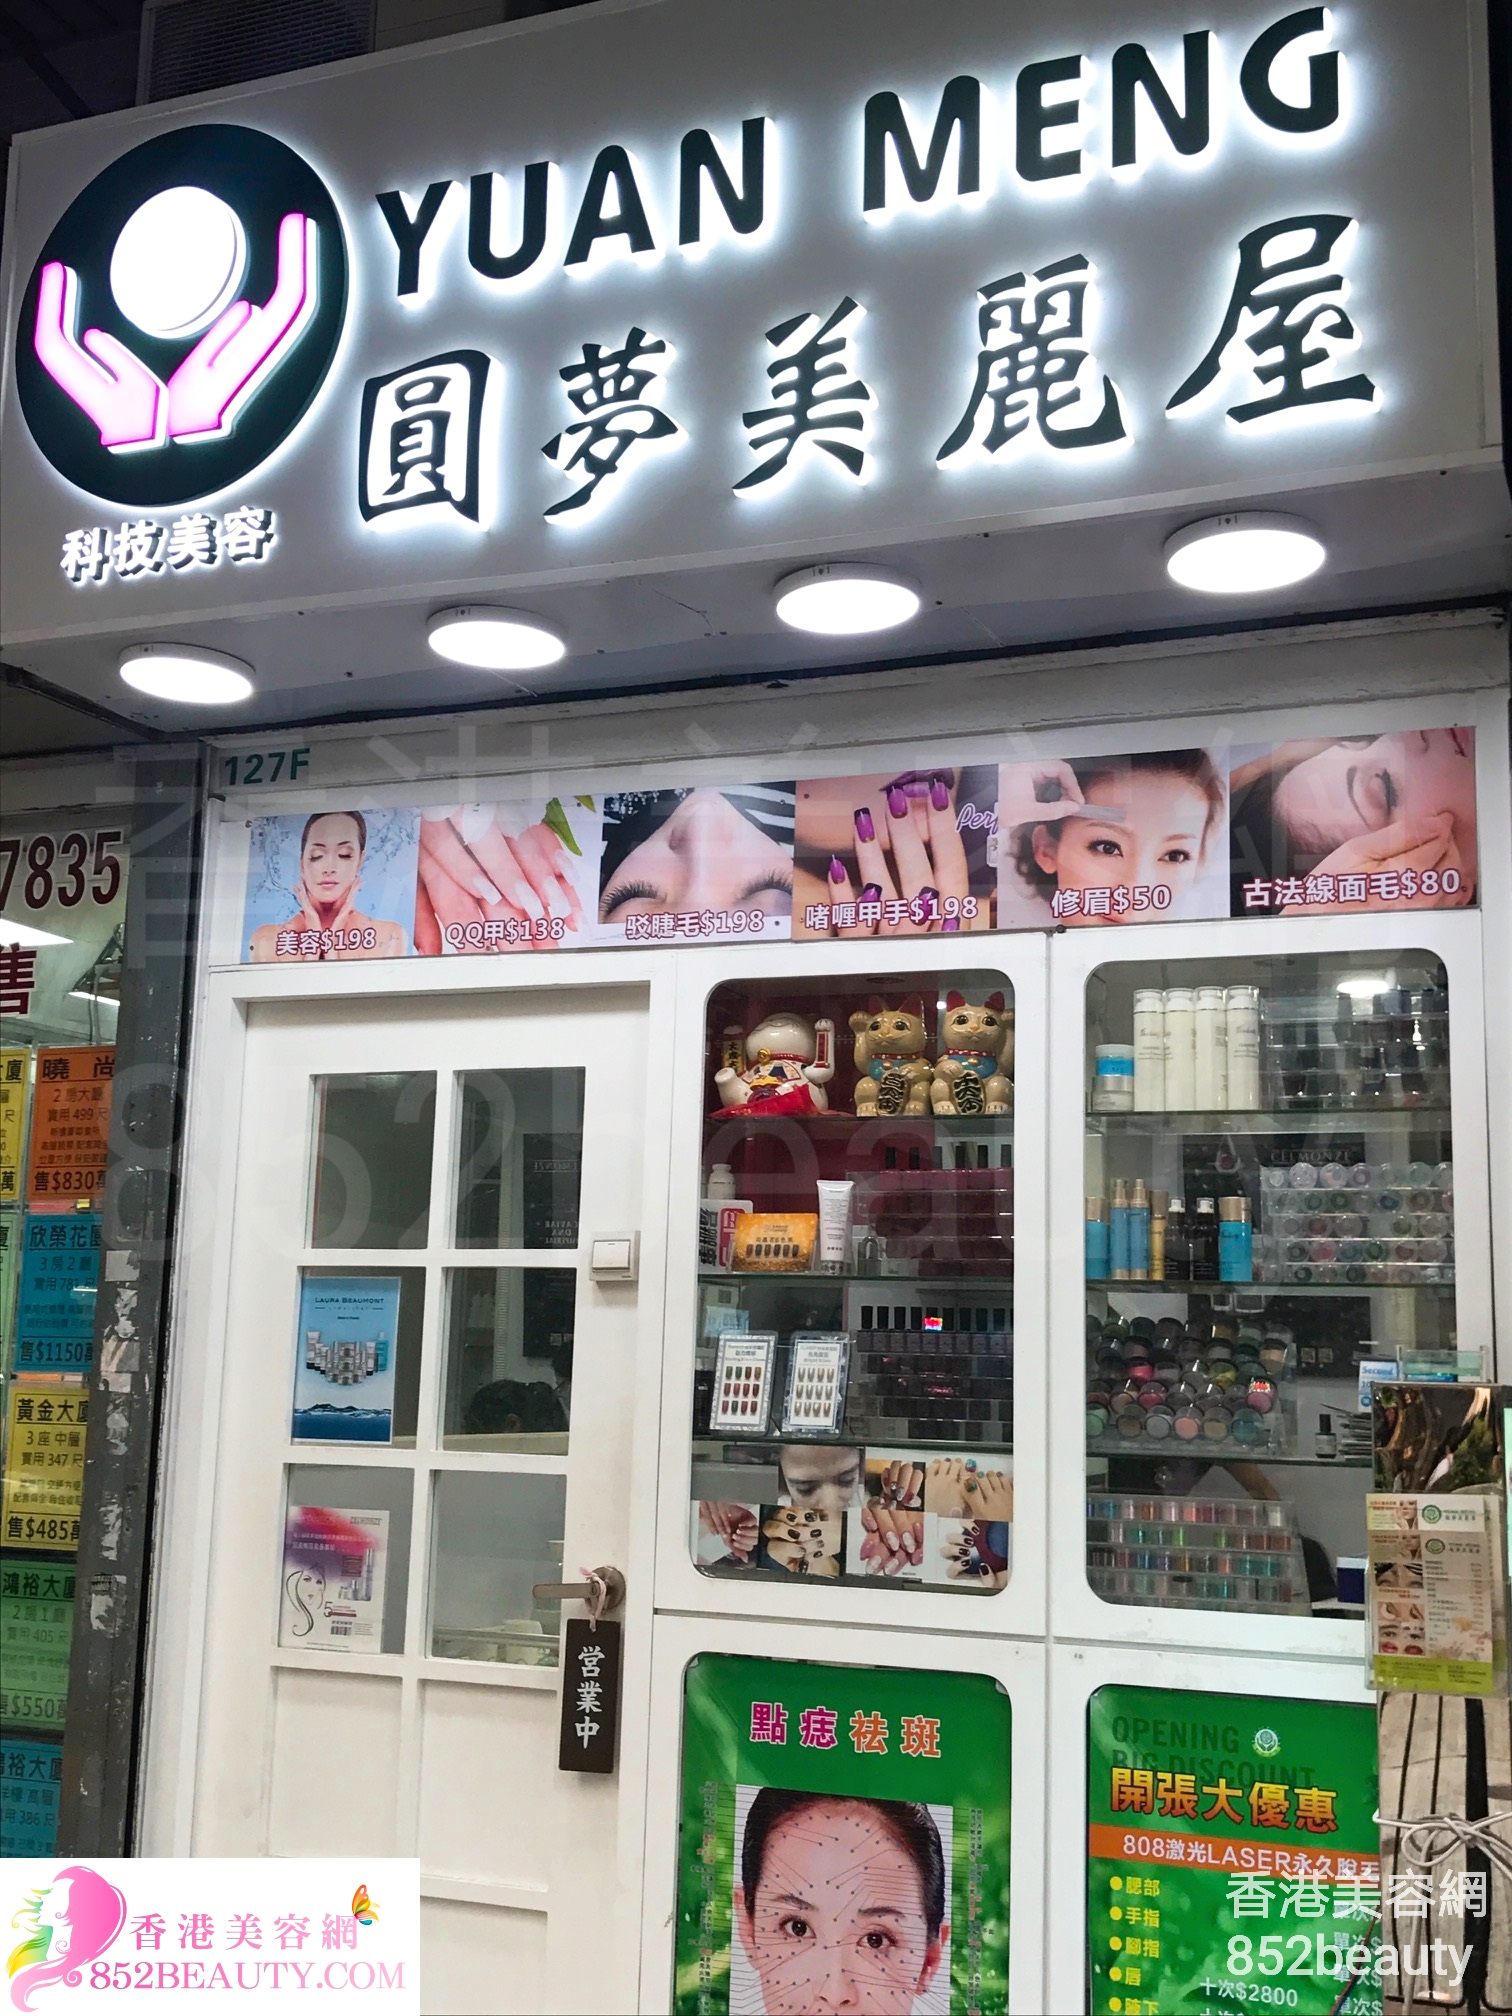 Hand and foot care: 圓夢美麗屋